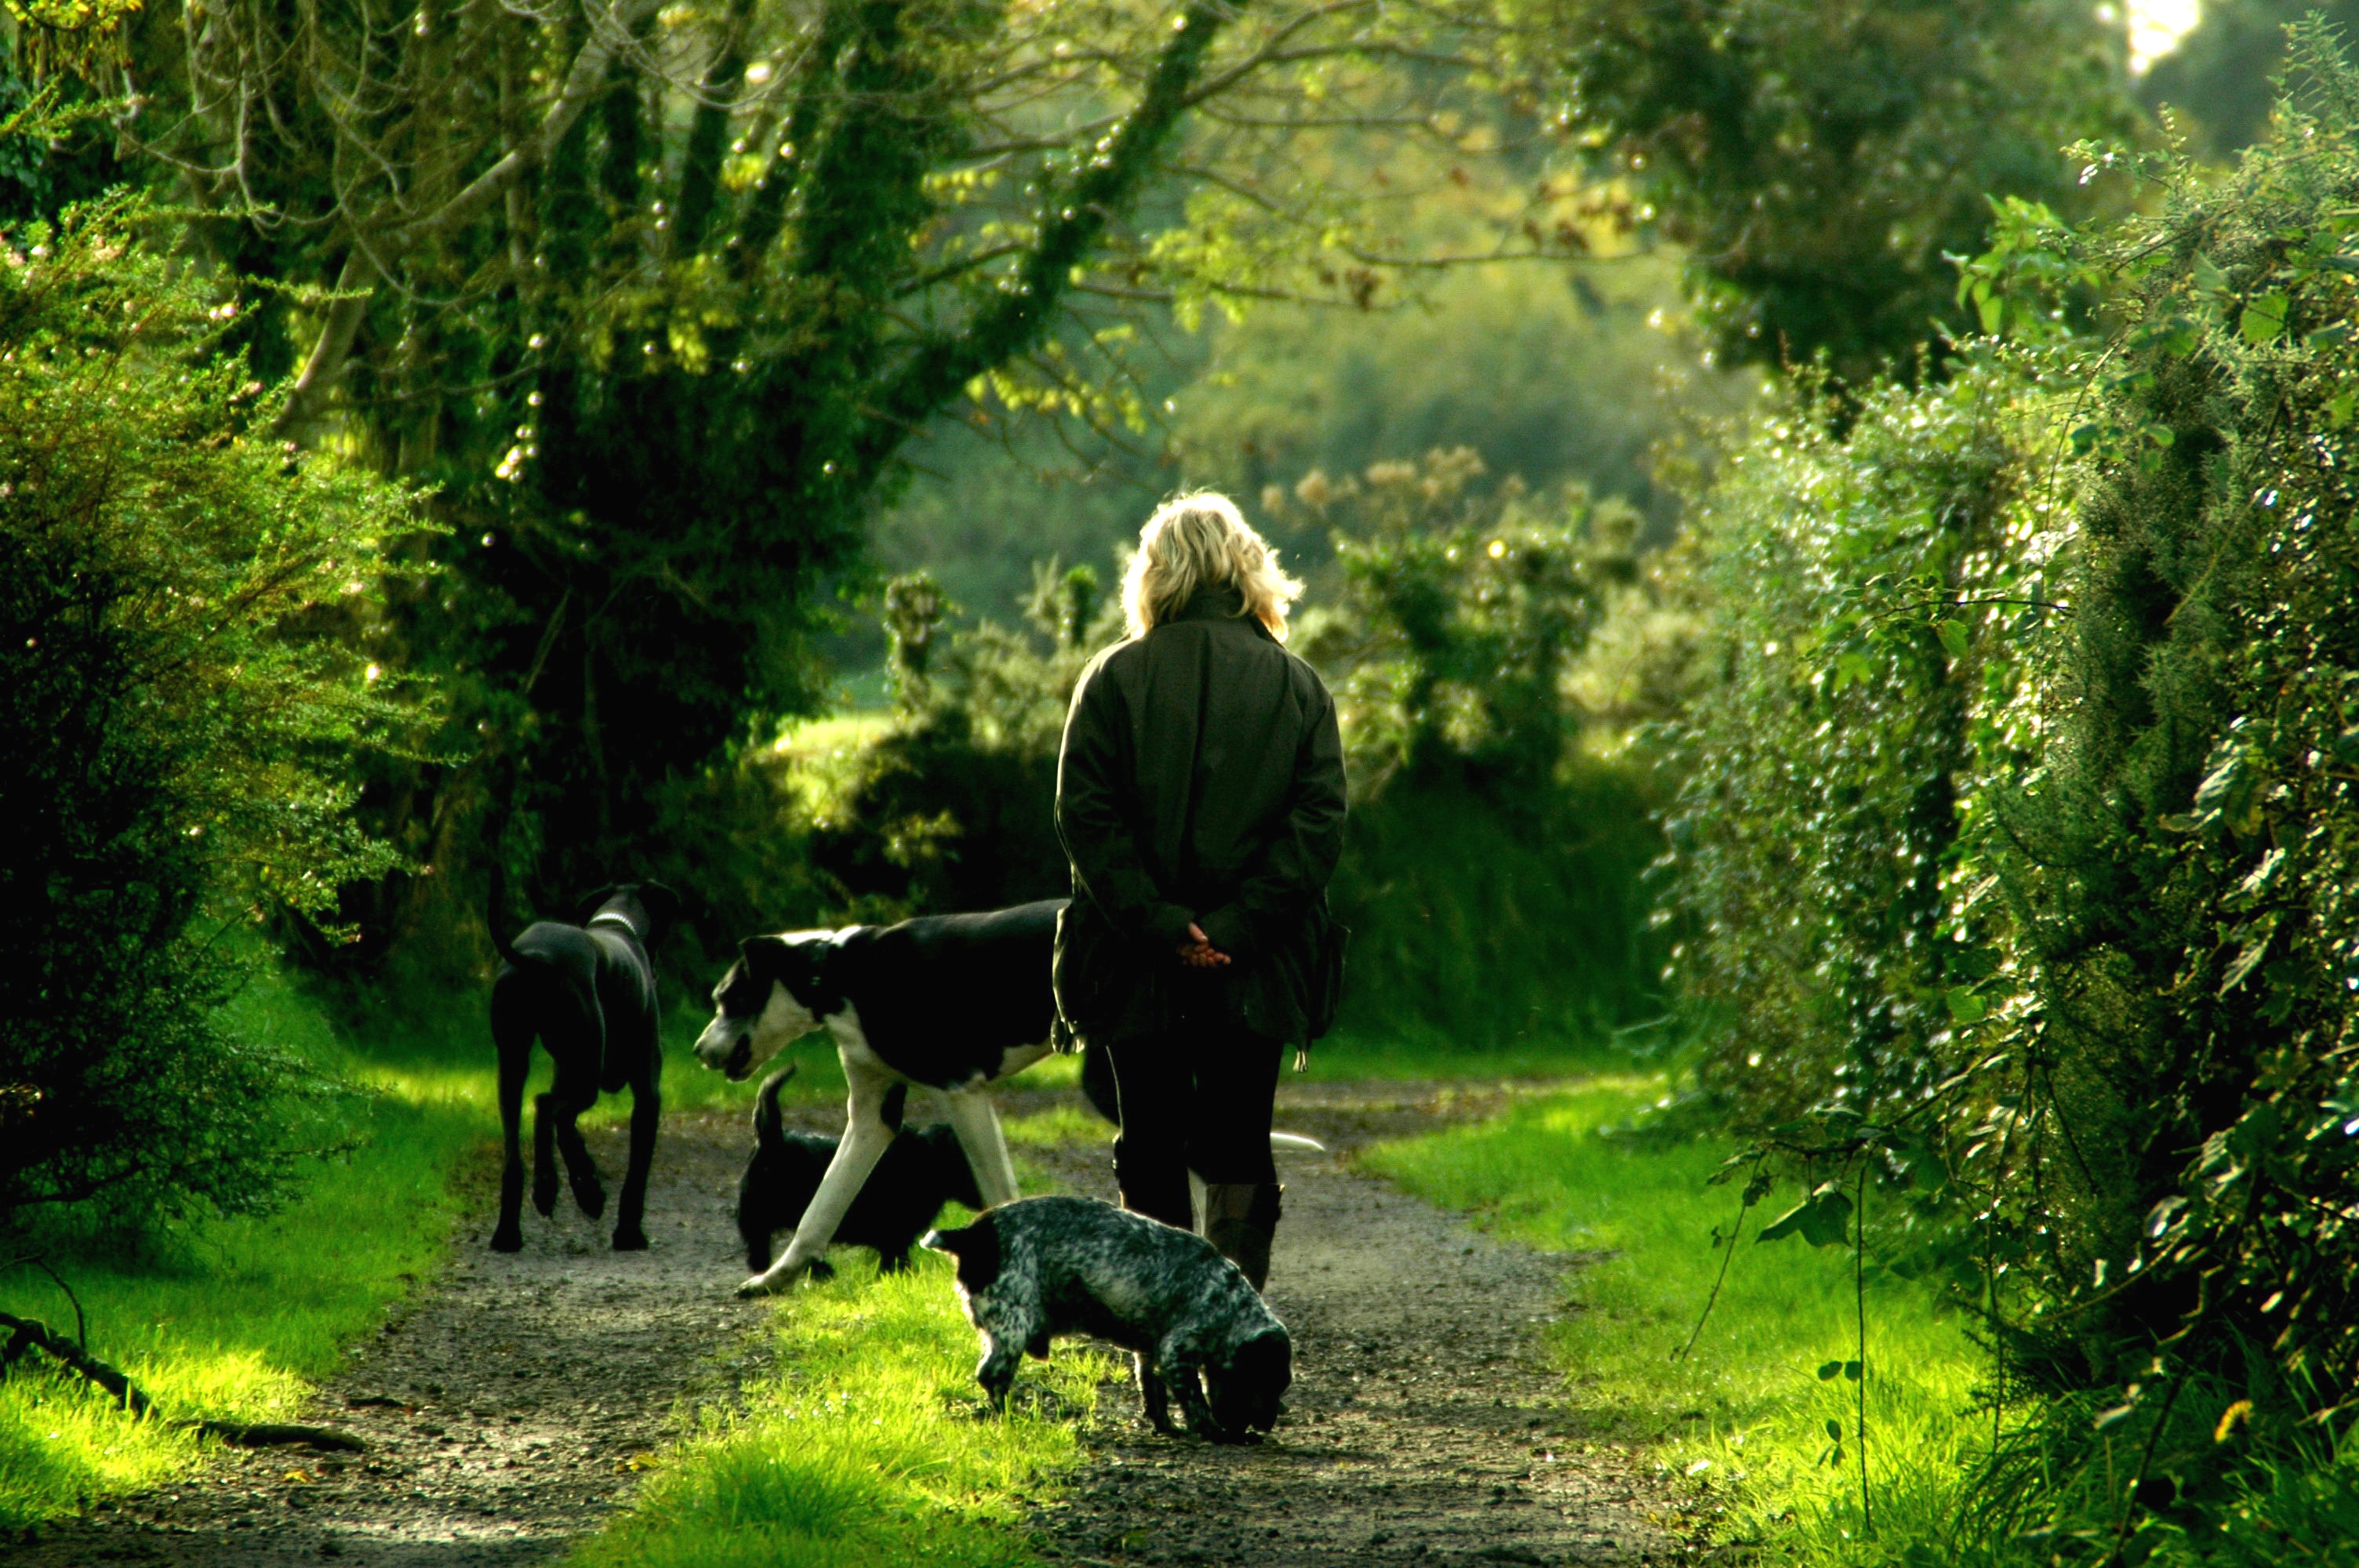 human in blonde hair wearing black jacket with four assorted dogs walking in the middle of the trail with trees and bushes on both sides